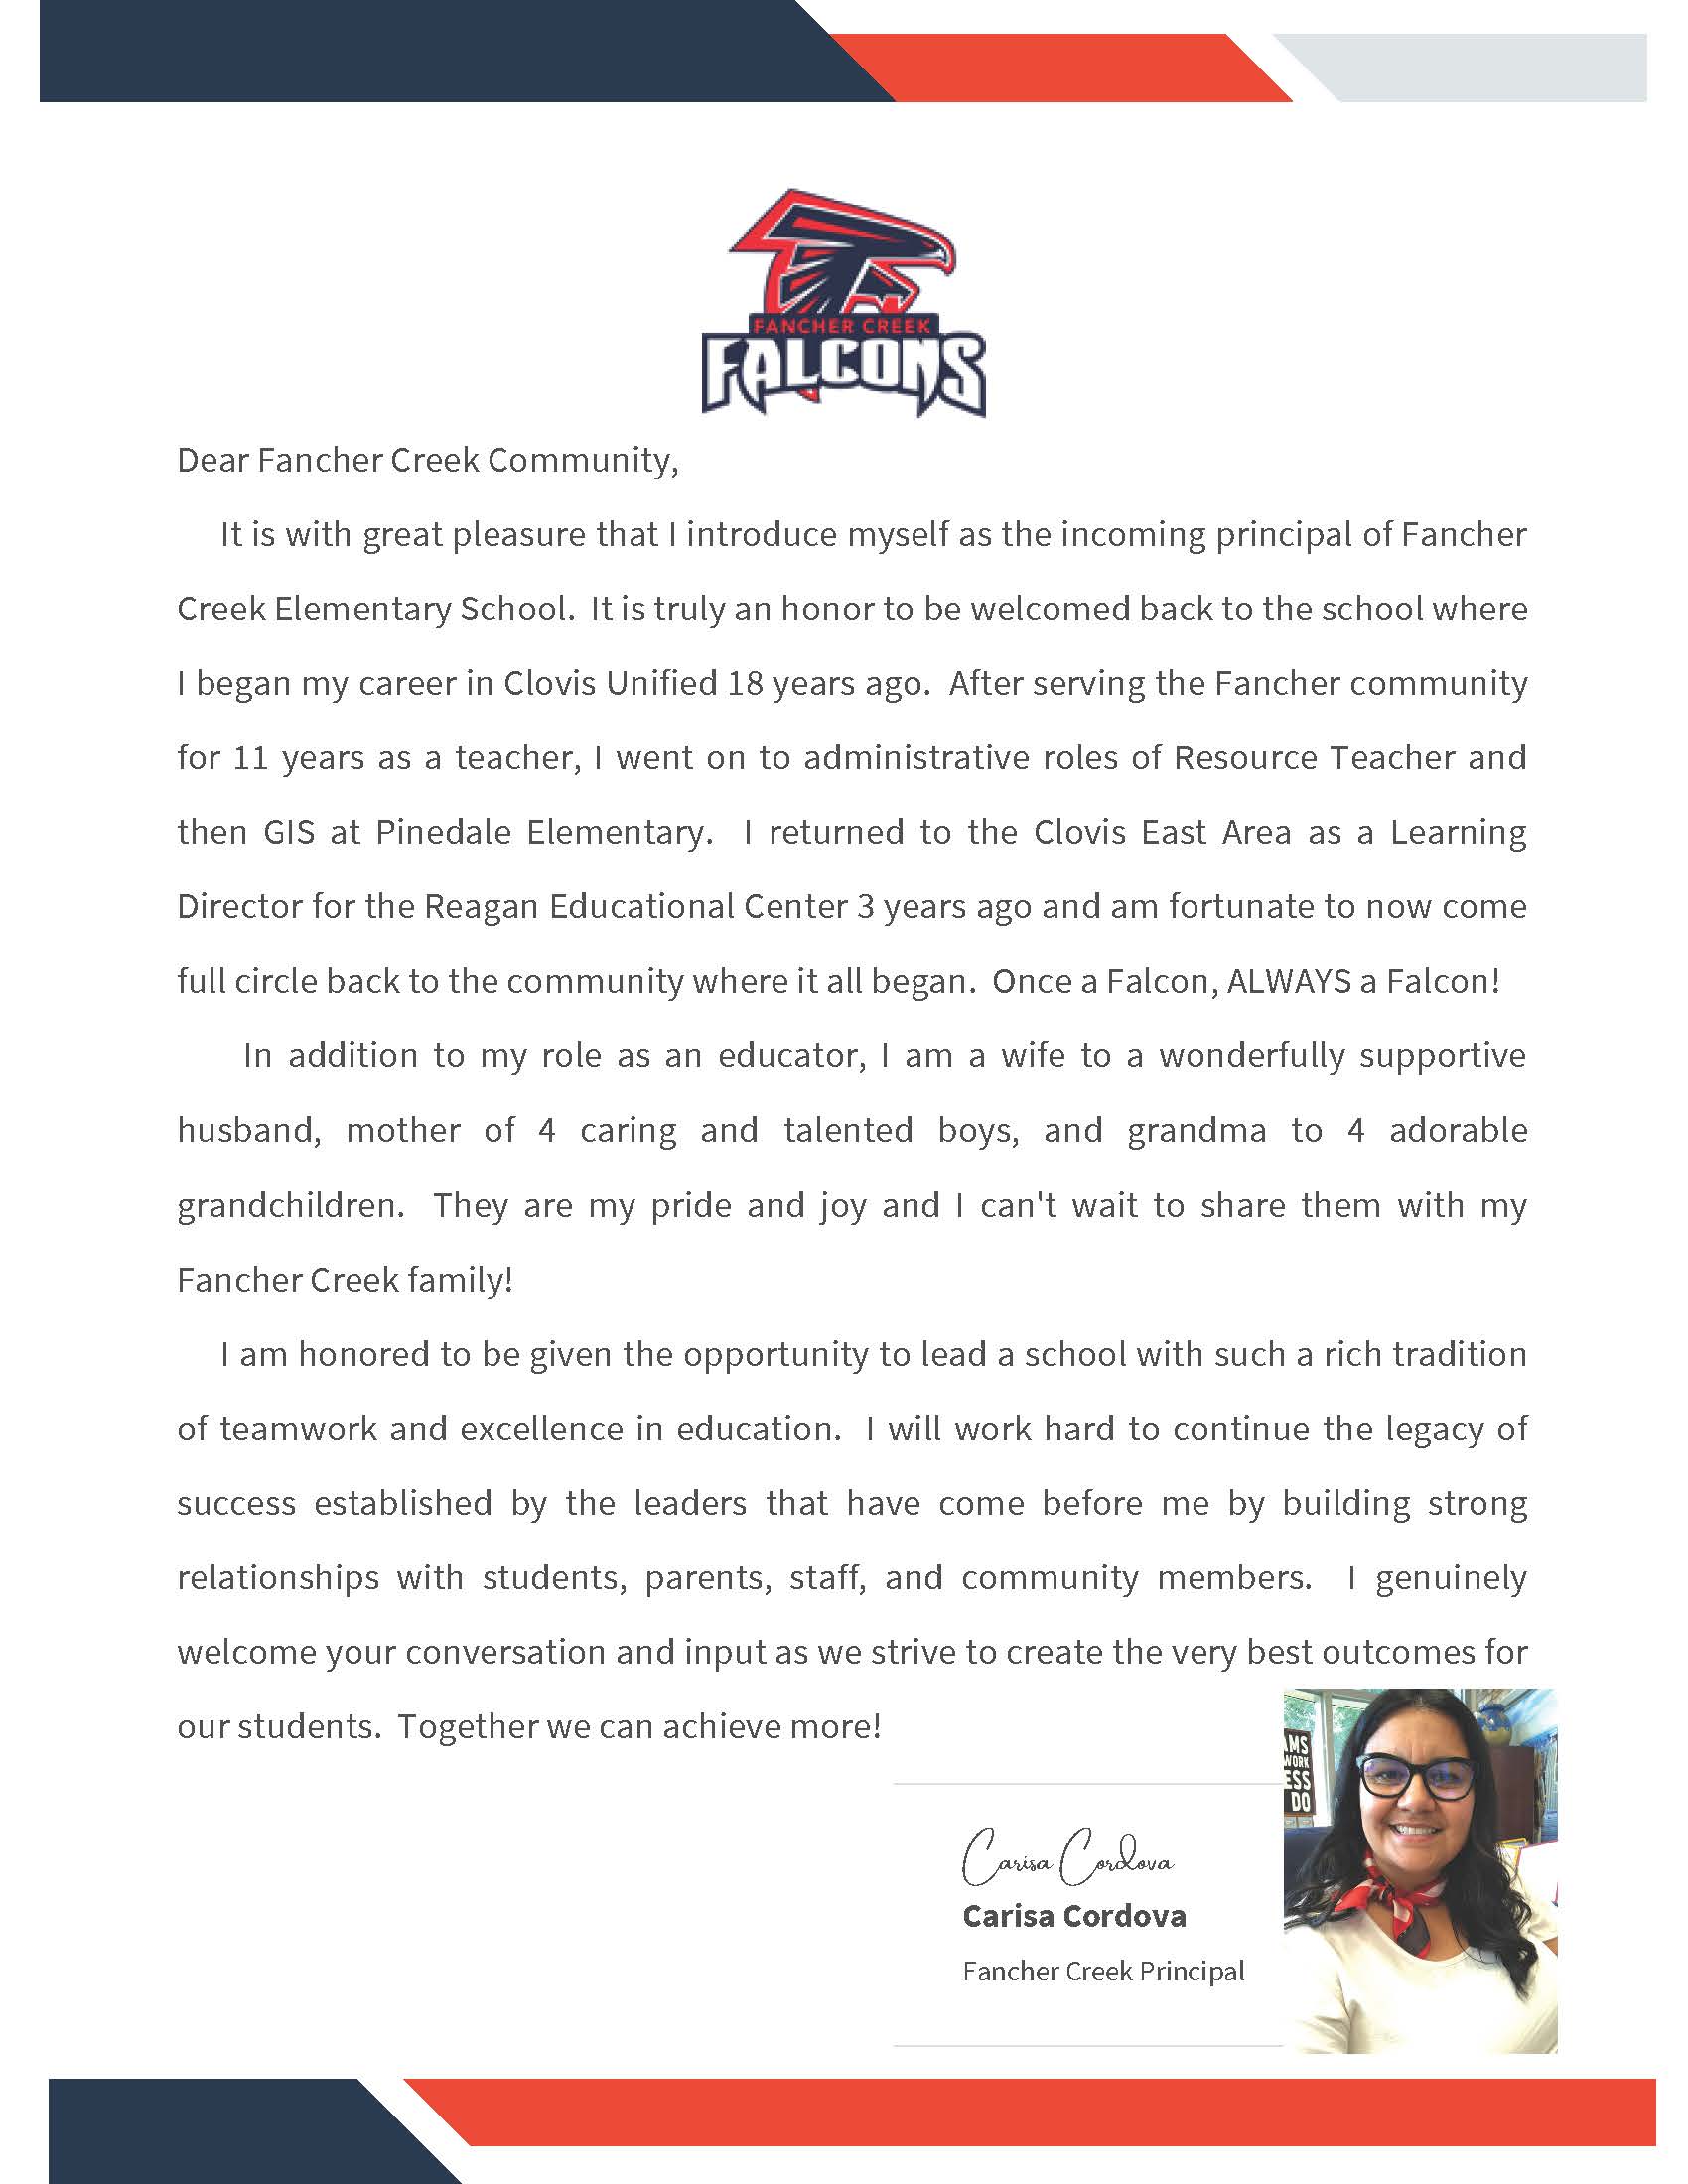 Dear Fancher Creek Community, It is with great pleasure that I introduce myself as the incoming principal of Fancher Creek Elementary School. It is truly an honor to be welcomed back to the school where I began my career in Clovis Unified 18 years ago. After serving the Fancher community for 11 years as a teacher, I went on to administrative roles of Resource Teacher and then GIS at Pinedale Elementary. I returned to the Clovis East Area as a Learning Director for the Reagan Educational Center 3 years ago and am fortunate to now come full circle back to the community where it all began. Once a Falcon, ALWAYS a Falcon! In addition to my role as an educator, I am a wife to a wonderfully supportive husband, mother of 4 caring and talented boys, and grandma to 4 adorable grandchildren. They are my pride and joy and I can't wait to share them with my Fancher Creek family! I am honored to be given the opportunity to lead a school with such a rich tradition of teamwork and excellence in education. I will work hard to continue the legacy of success established by the leaders that have come before me by building strong relationships with students, parents, staff and community members. I genuinely welcome your conversation and input as we strive to create the very best outcomes for our students. Together we can achieve more! Carisa Cordova, Fancher Creek Principal